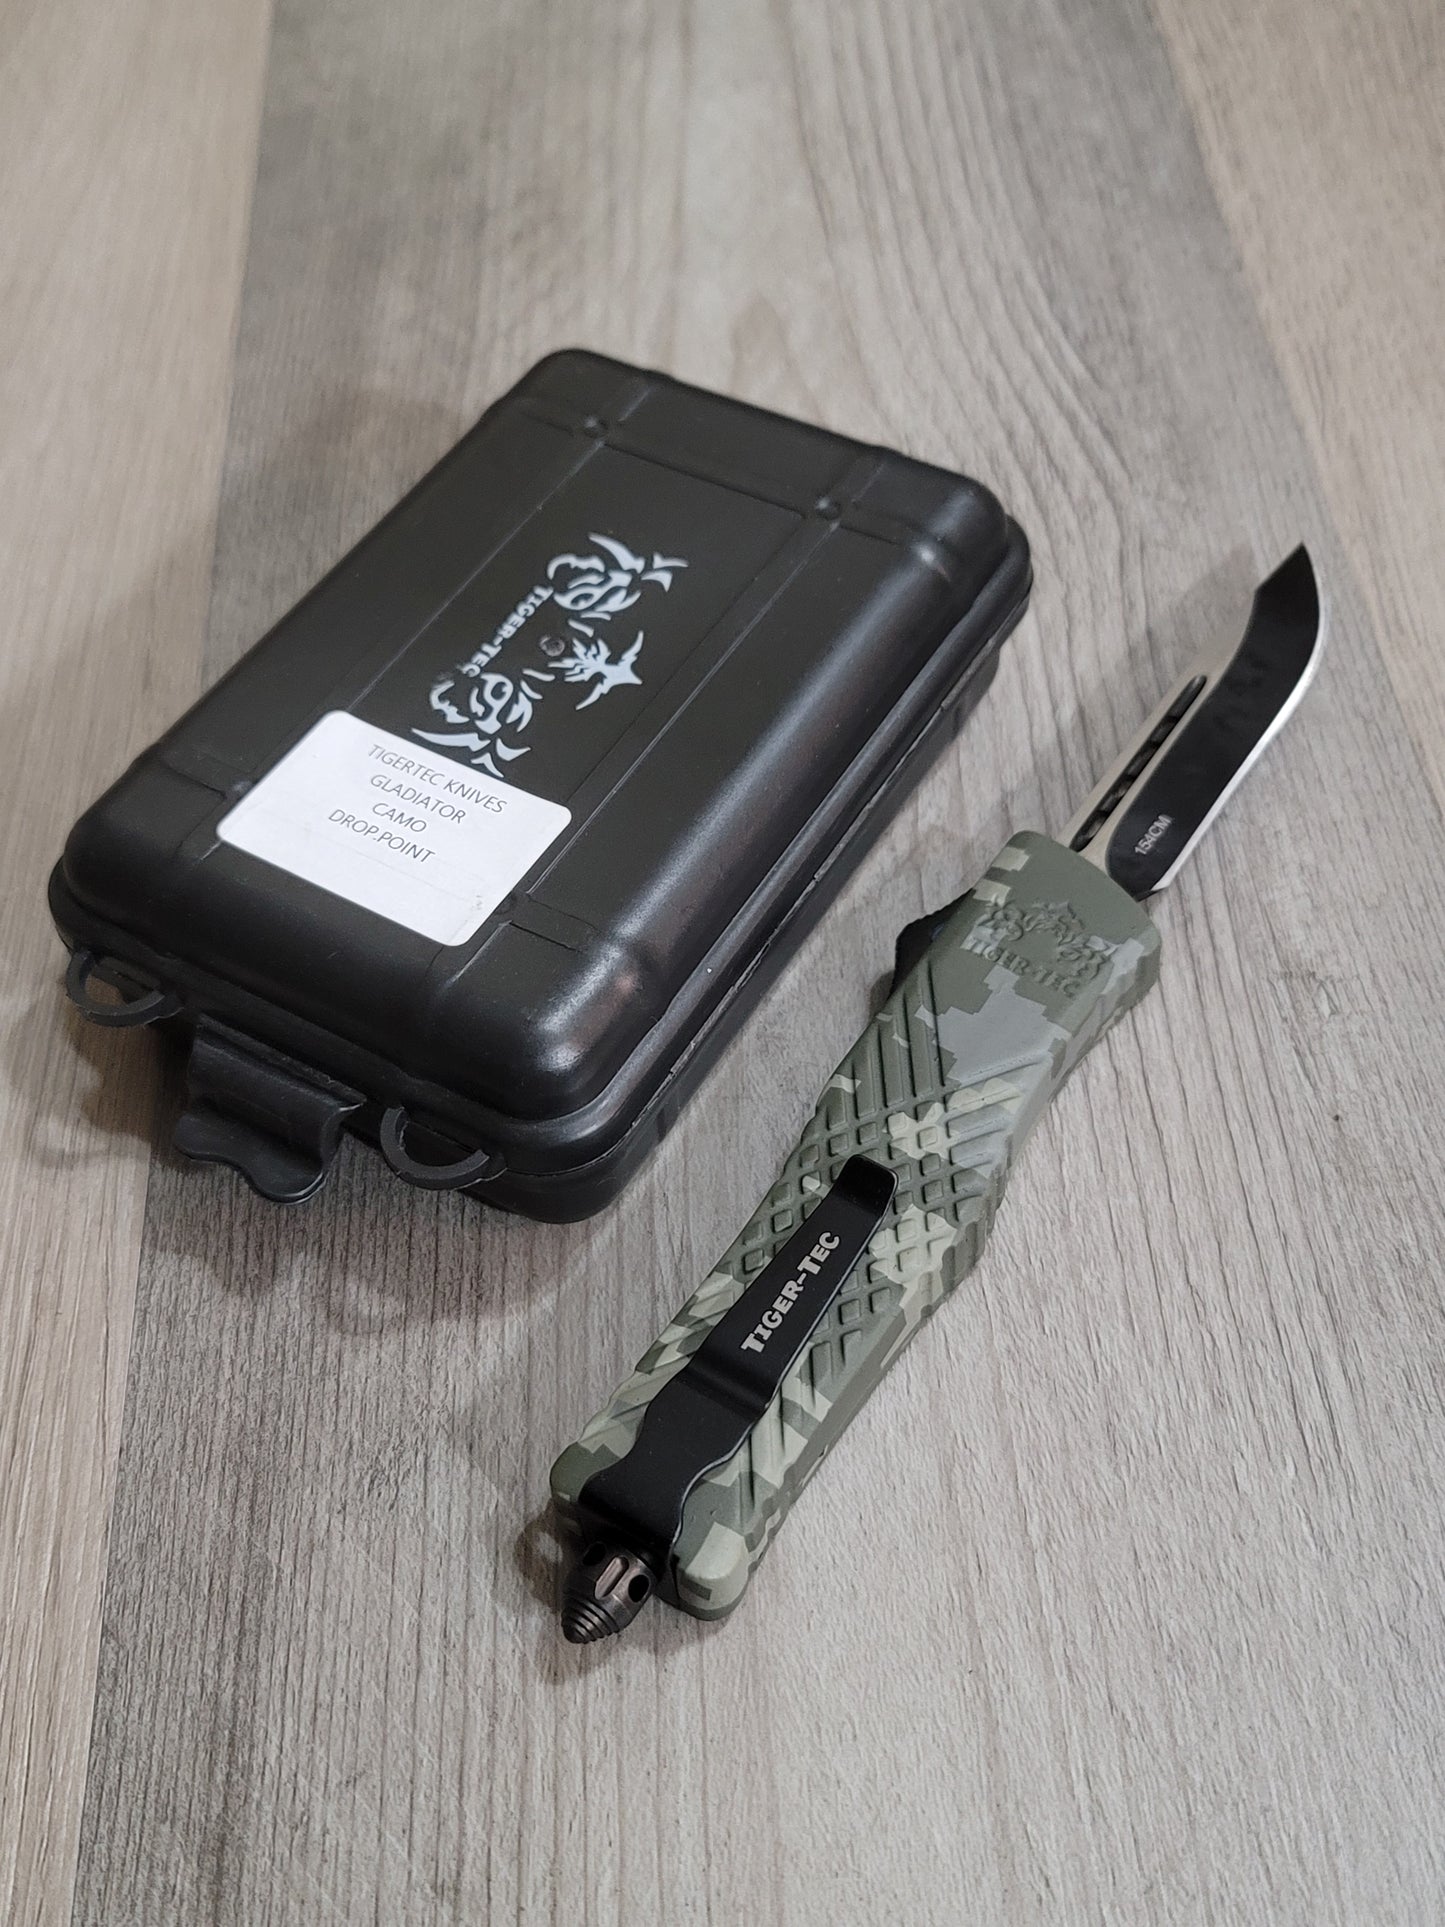 Tiger Tec Gladiator Out the Front Knife. Camo Drop Point Blade